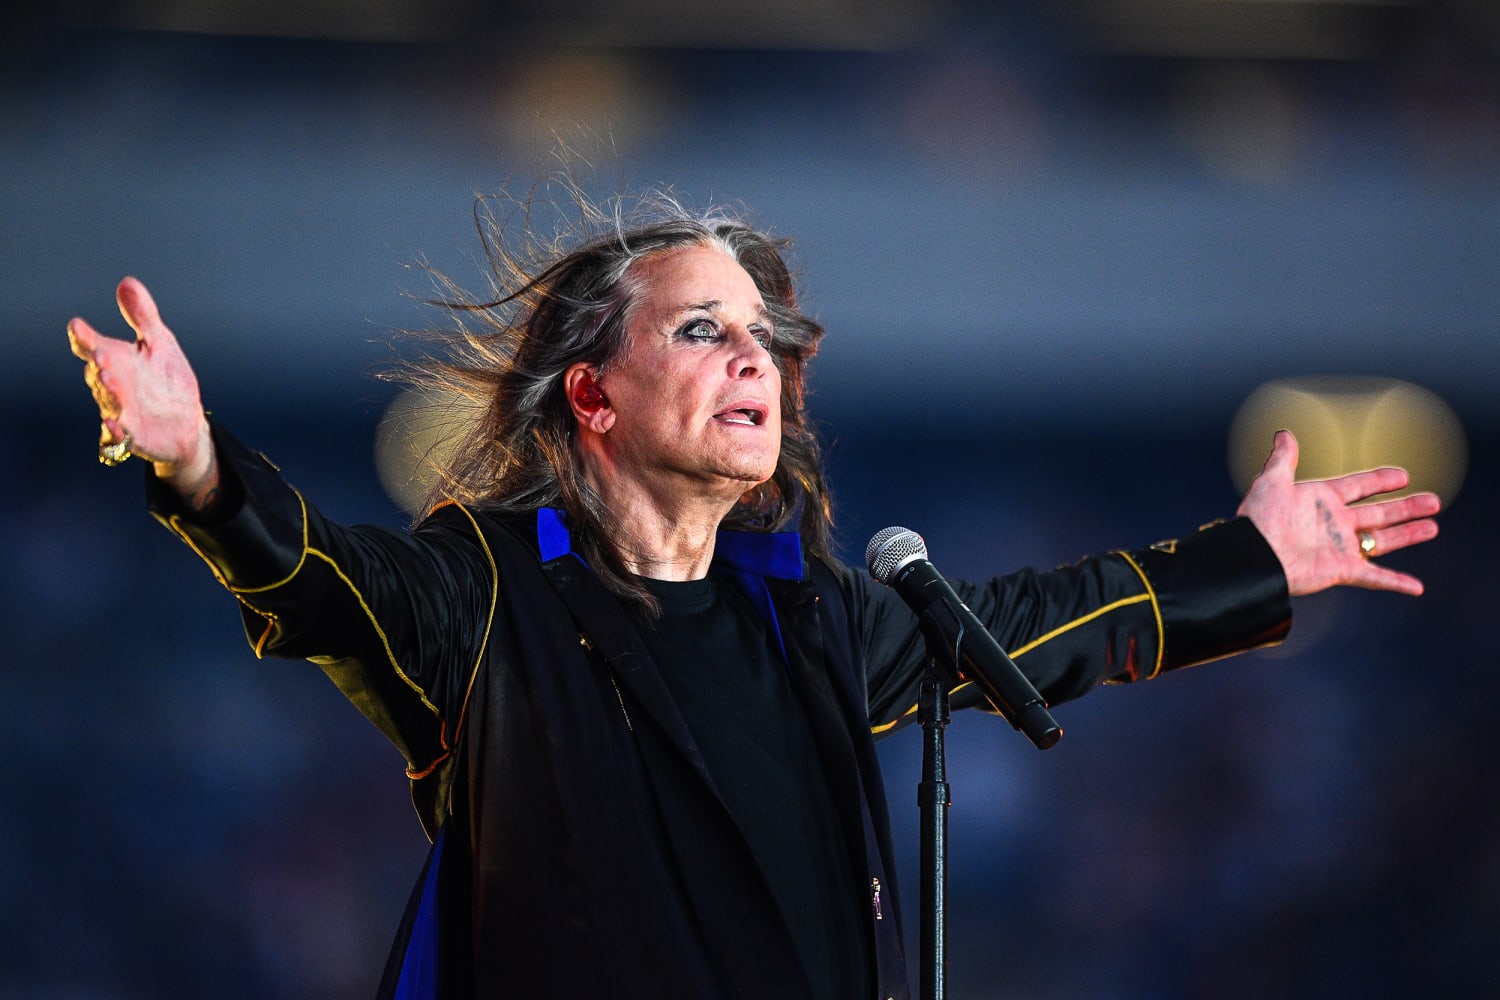 Ozzy Osbourne cancels 2023 tour dates, says spinal injury means his 'touring days have ended'